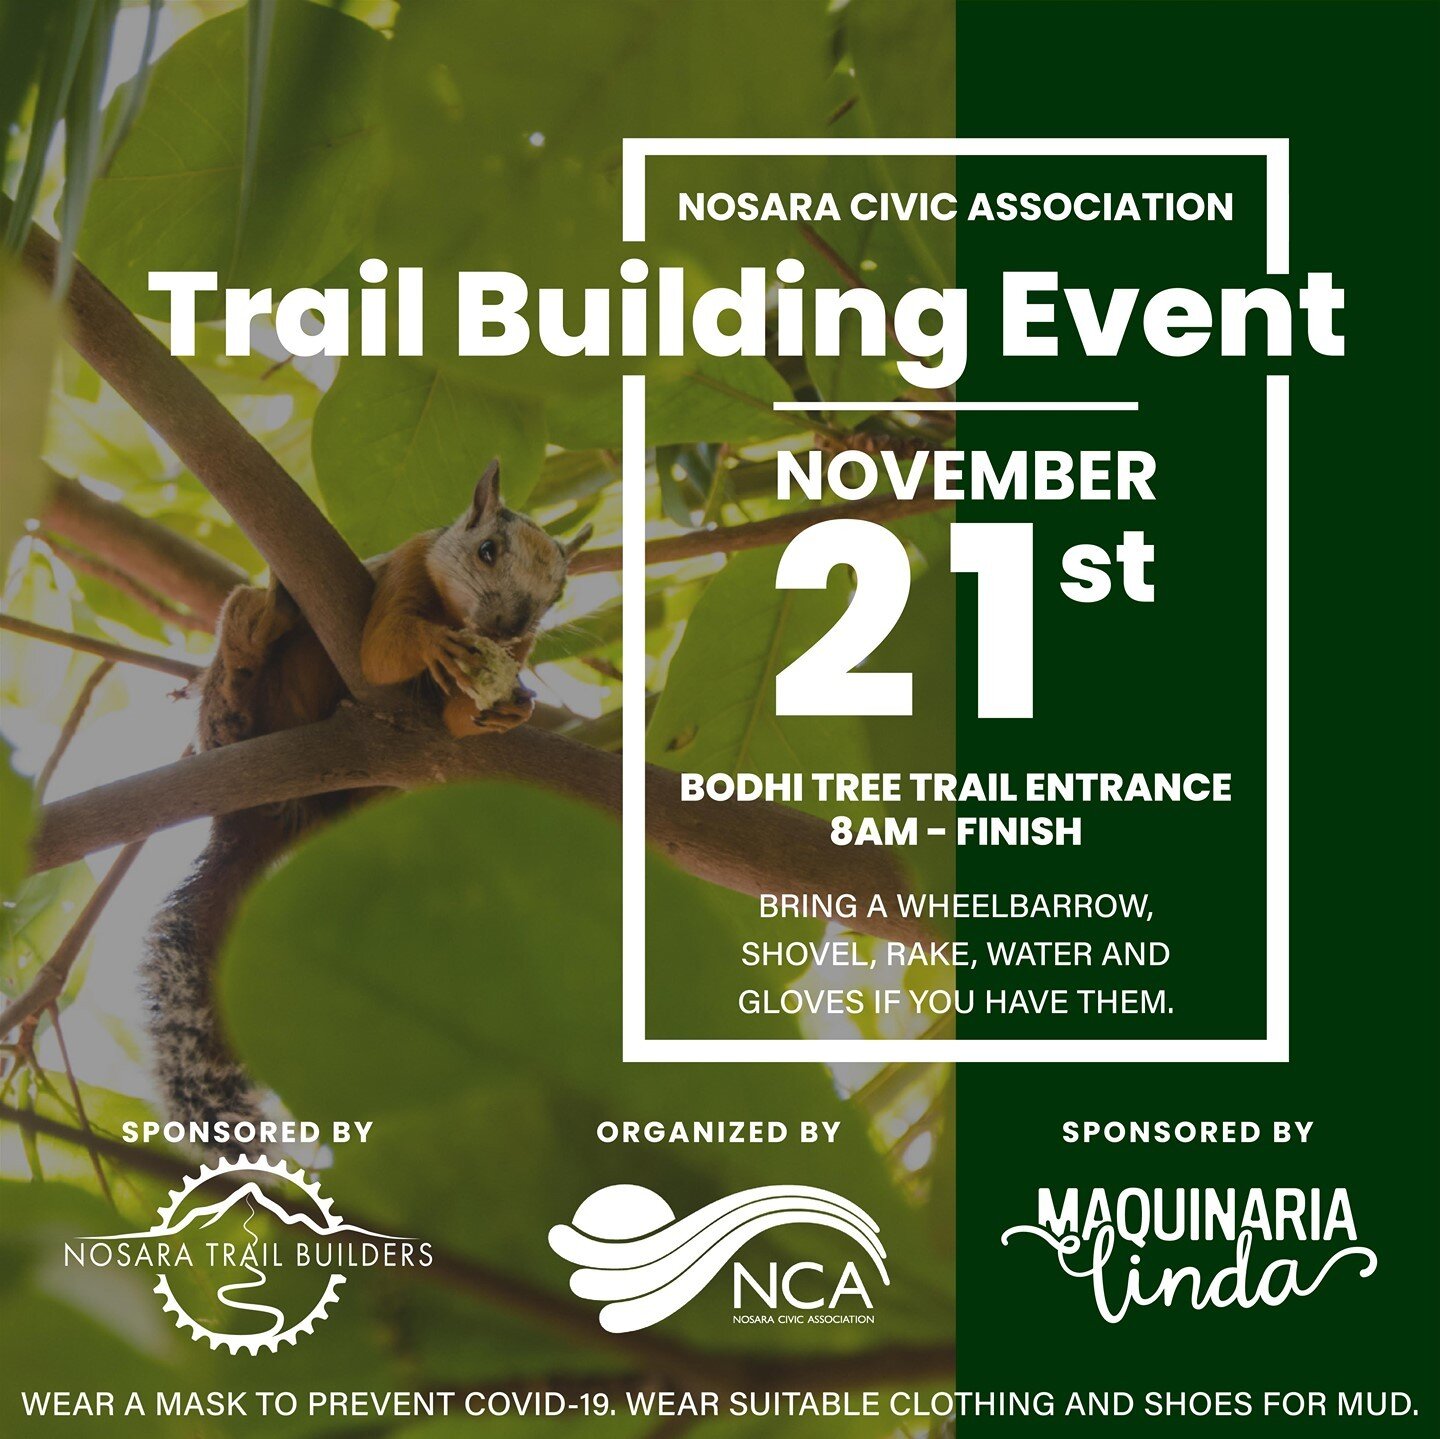 Join us this Saturday, as we help the Nosara Civic Association and Nosara Trail Builders, to improve our amazing trail system. We will be meeting at the Bodhi Tree Trail Entrance at 8:00am and will be spreading lastre along the length of the trail co